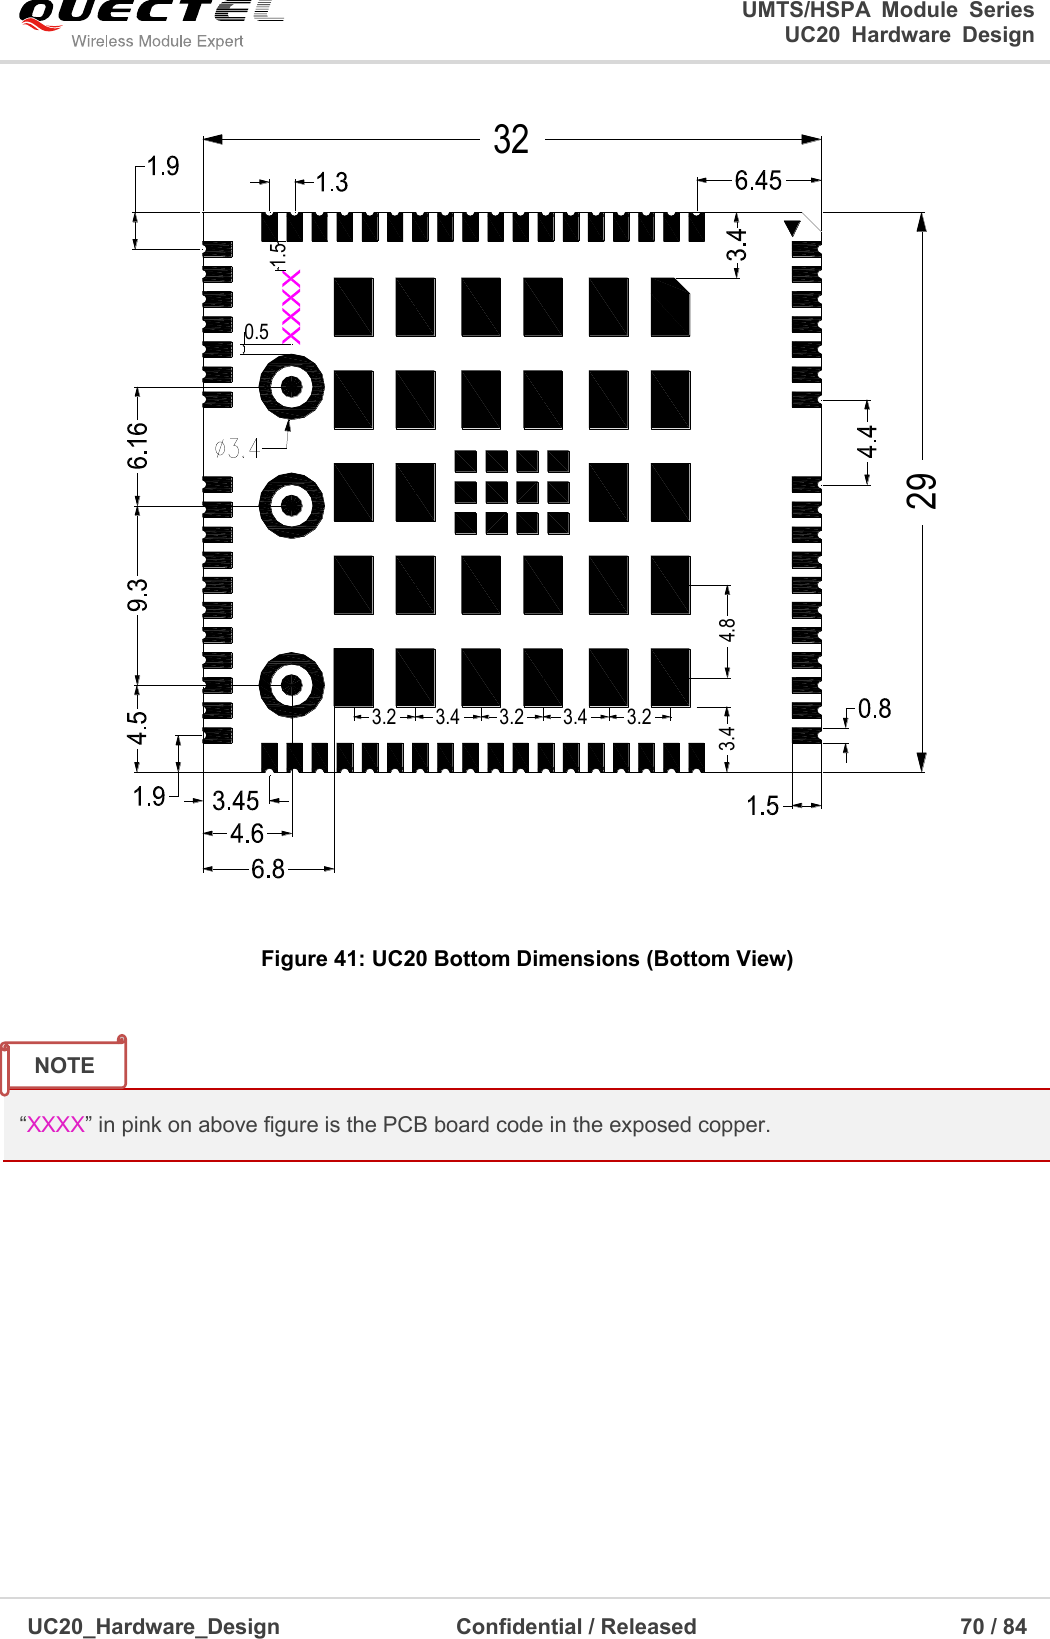                                                                                                                                               UMTS/HSPA  Module  Series                                                                 UC20  Hardware  Design  UC20_Hardware_Design                  Confidential / Released                            70 / 84     3.43.2 3.4 3.2 3.4 3.24.832290.51.5 Figure 41: UC20 Bottom Dimensions (Bottom View)   “XXXX” in pink on above figure is the PCB board code in the exposed copper.     NOTE 